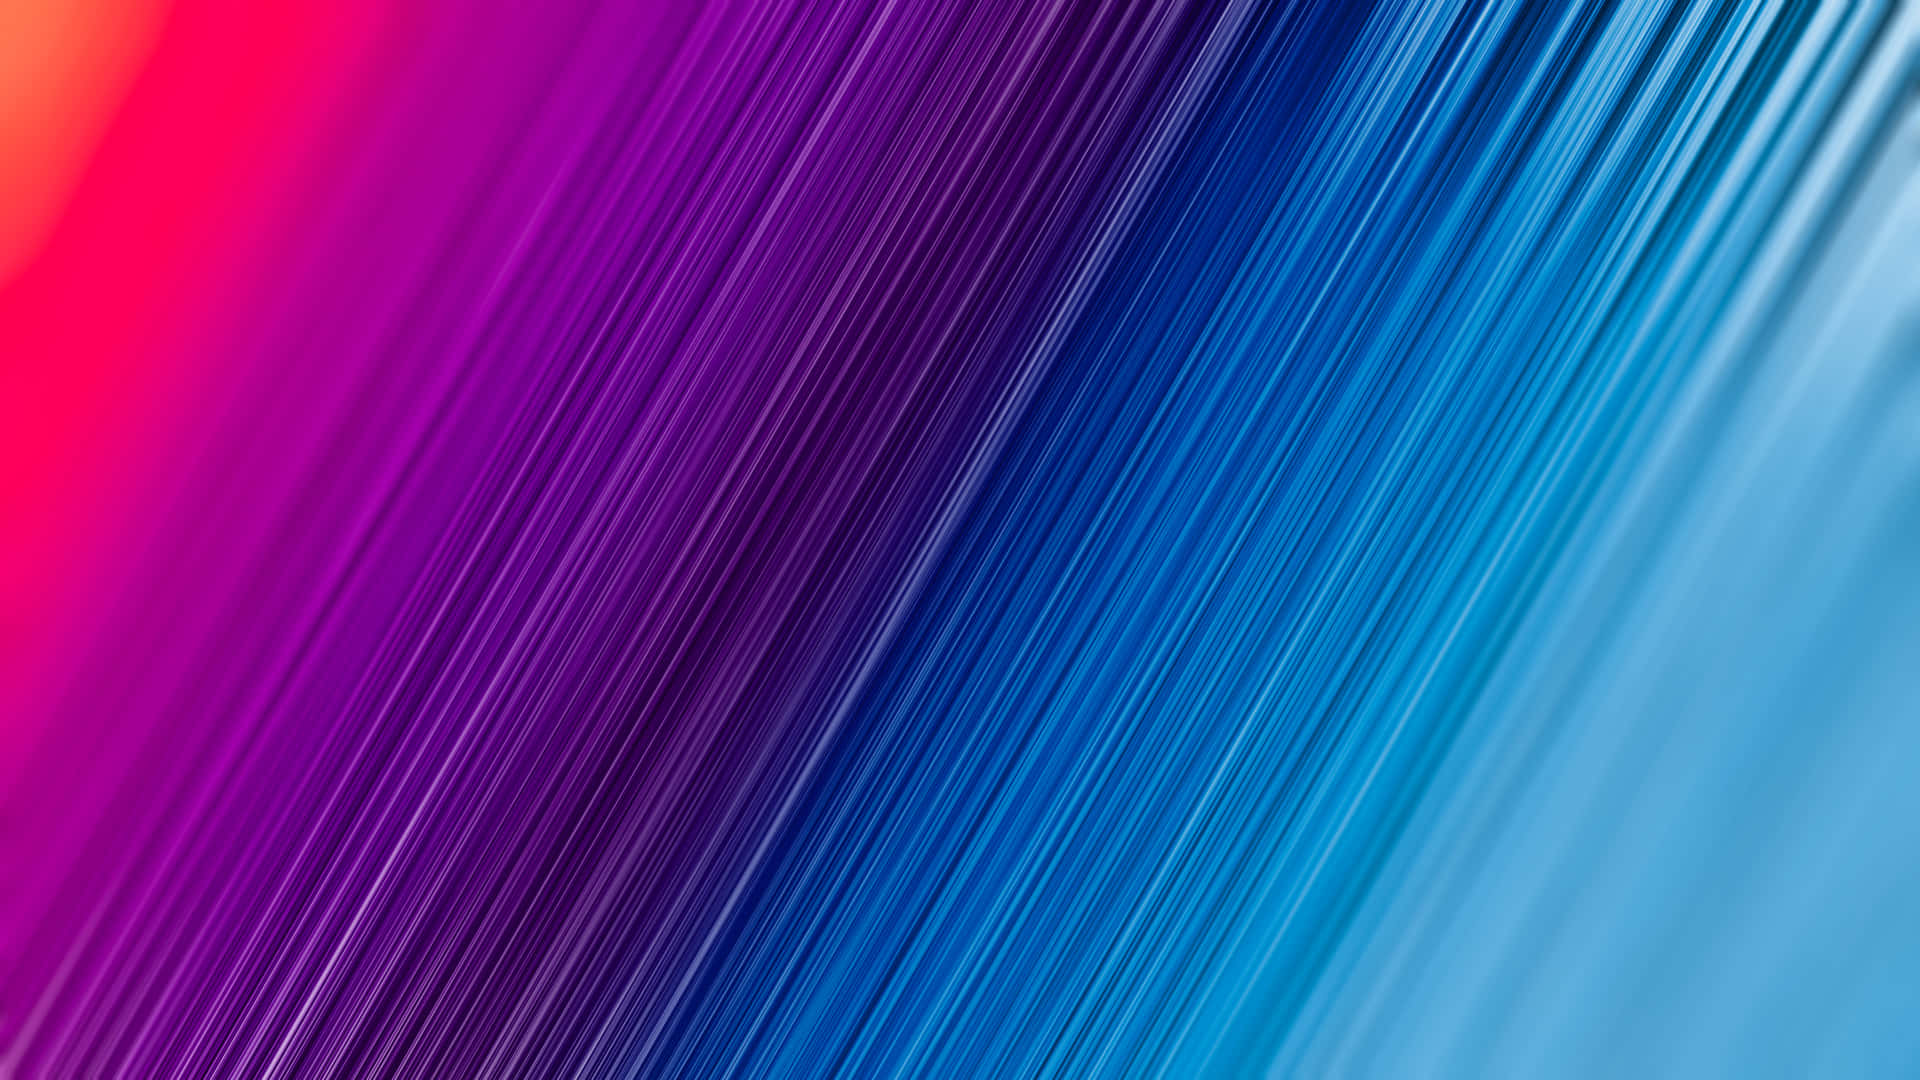 Diagonal Lines In Colorful Abstract Art Background